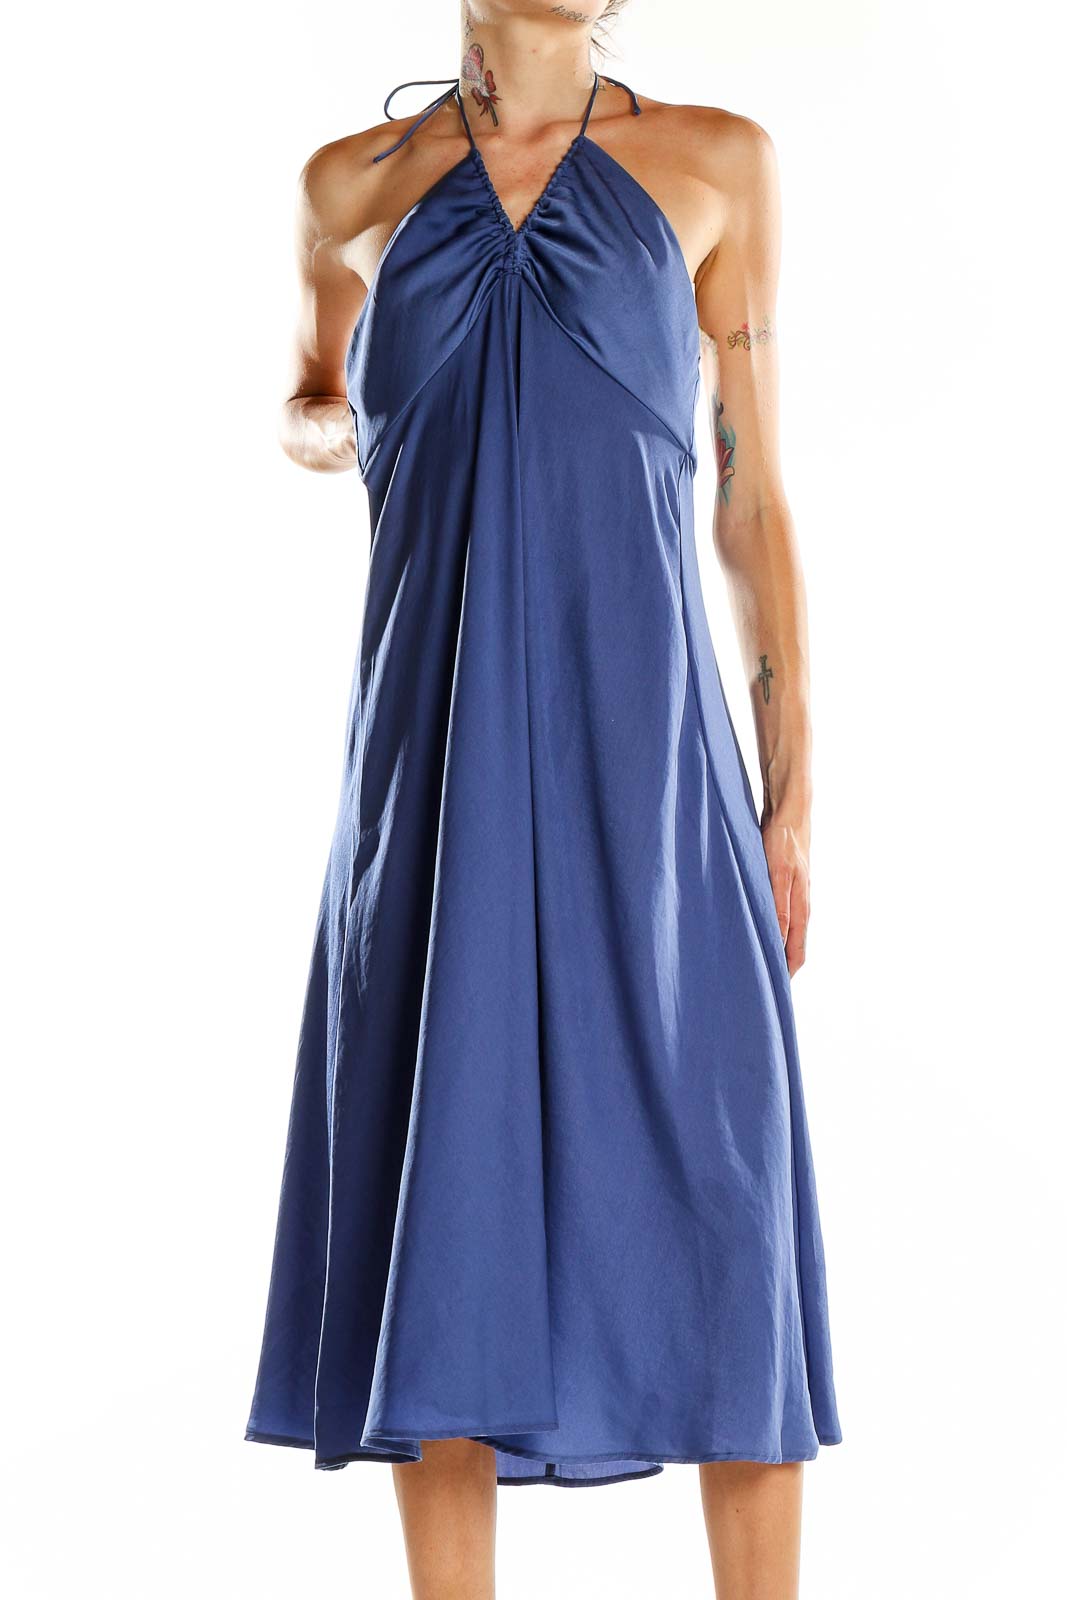 Blue Fit & Flare Midi Dres Front